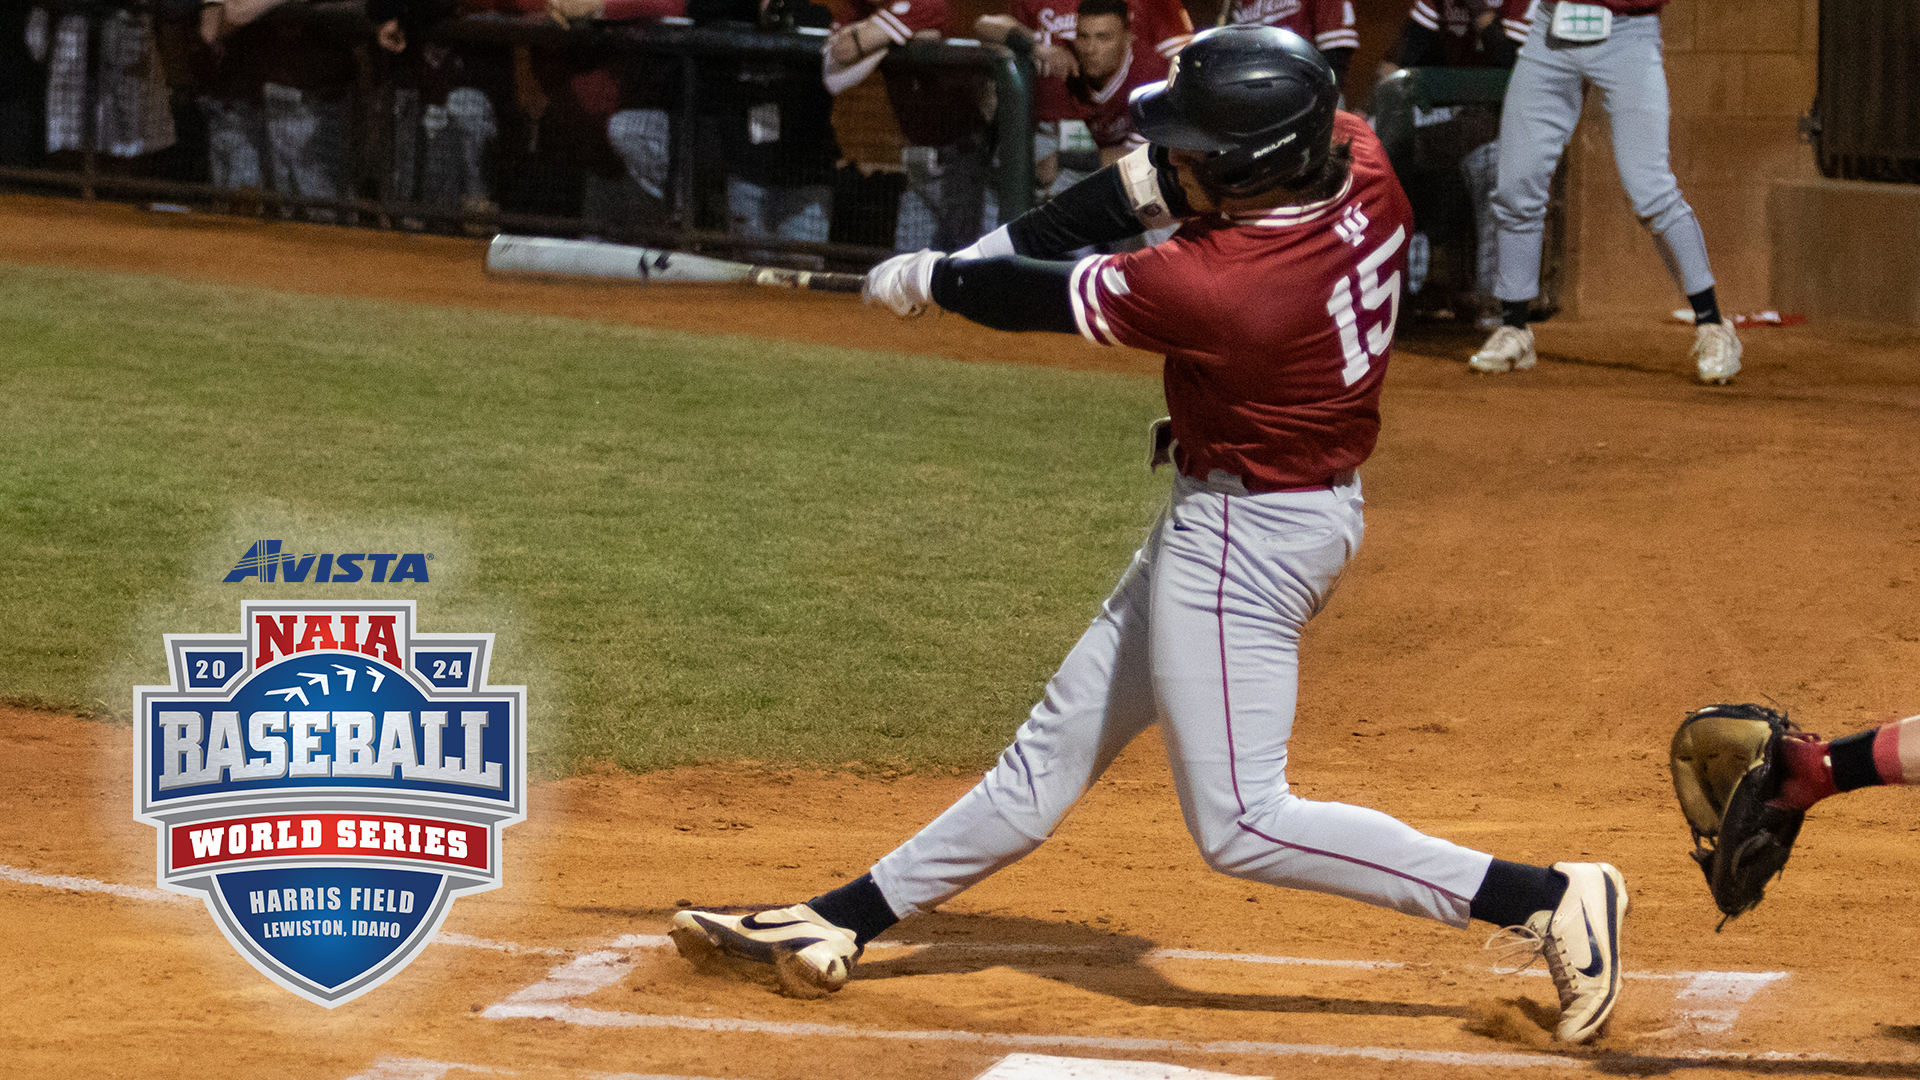 Mason White hit two home runs to help lead IU Southeast to a 6-5 victory over William Carey in the Avista NAIA Baseball World Series. Photo by Spencer Farrin.